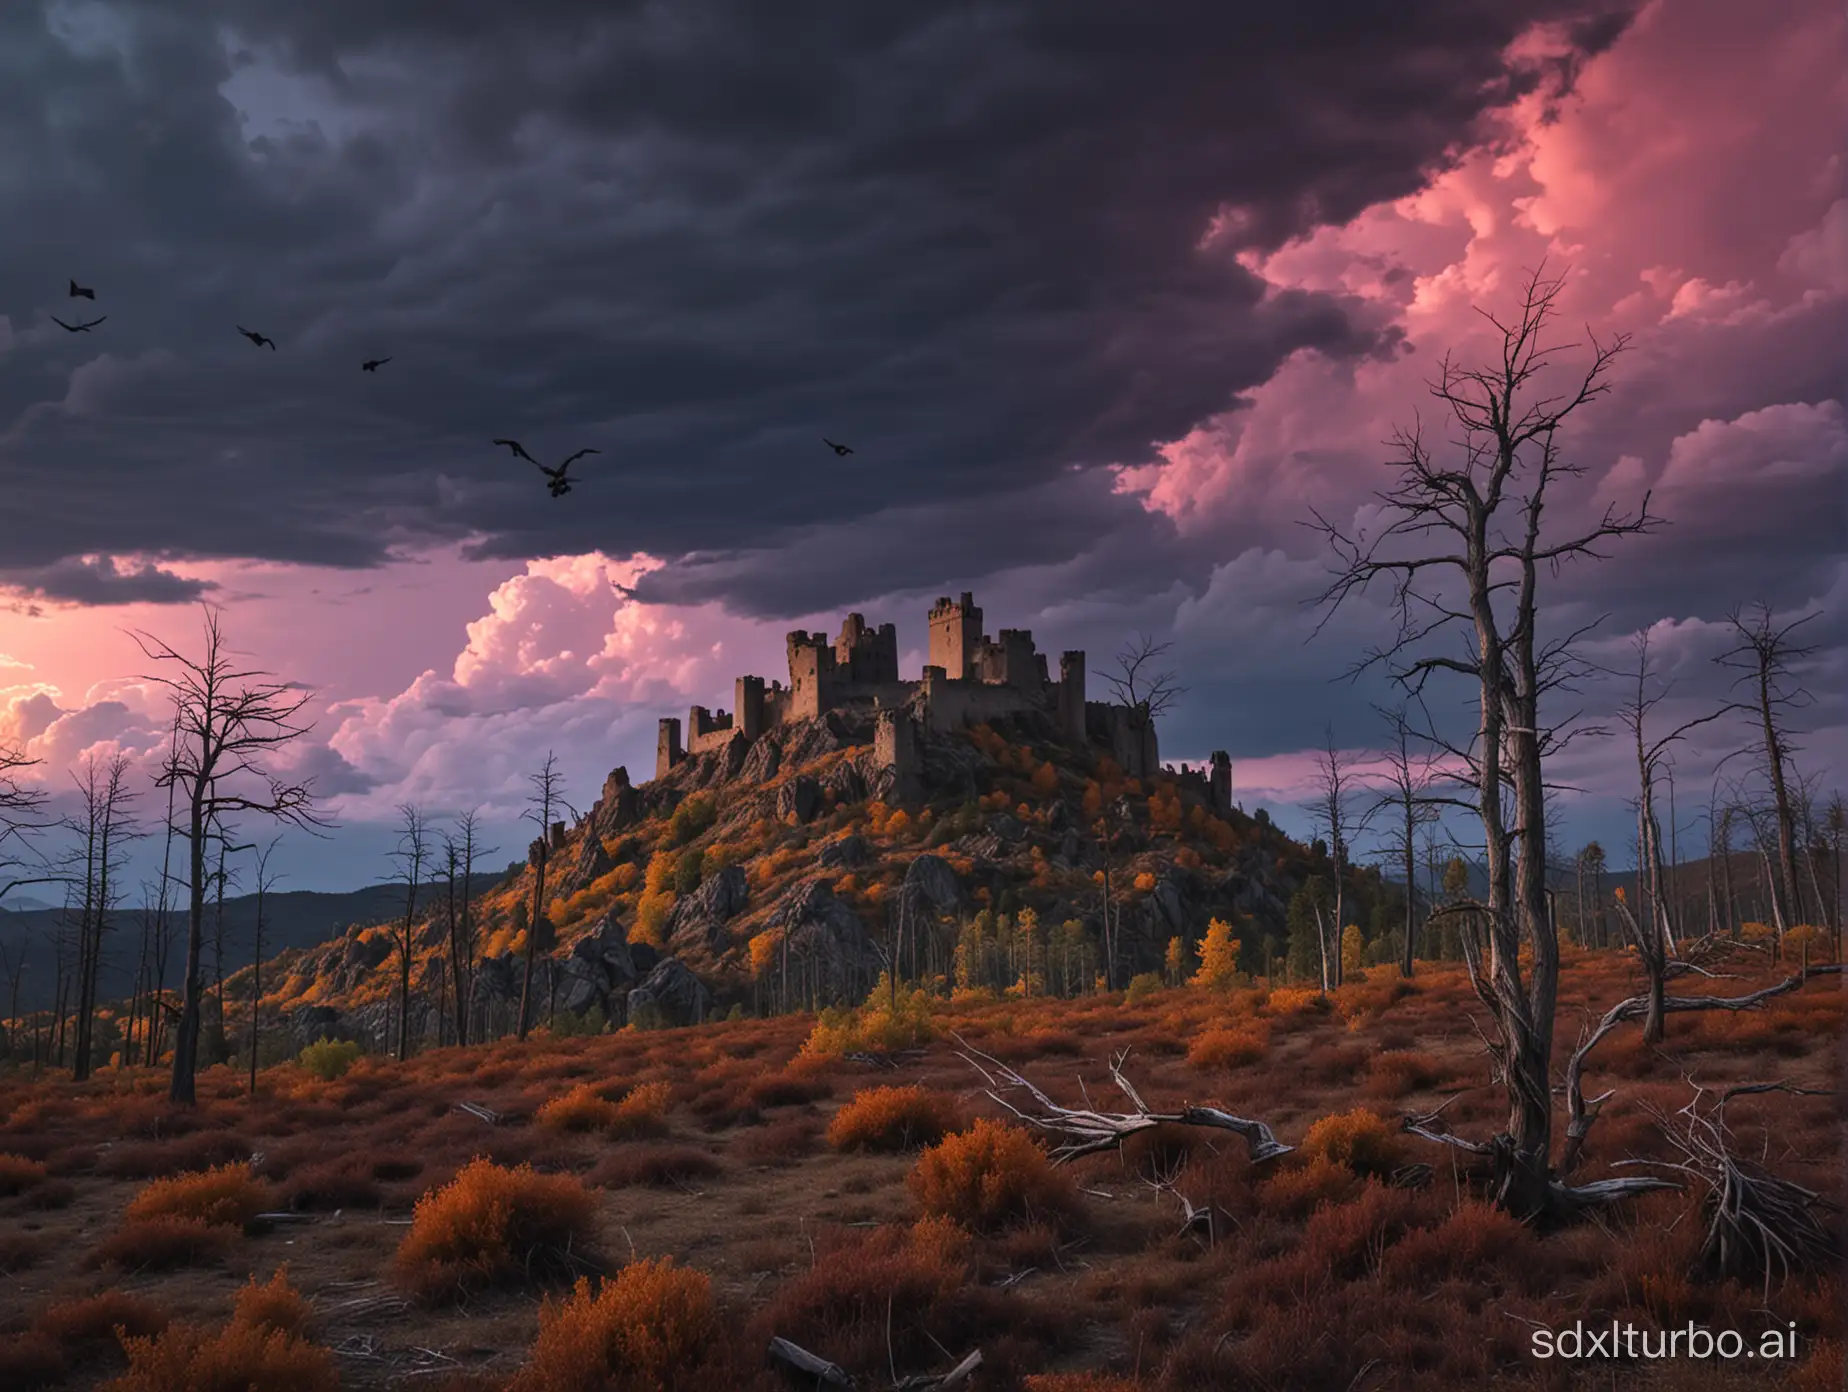 Ethereal-Castle-Ruins-Amidst-Stormy-Night-Sky-and-Dead-Pine-Forest